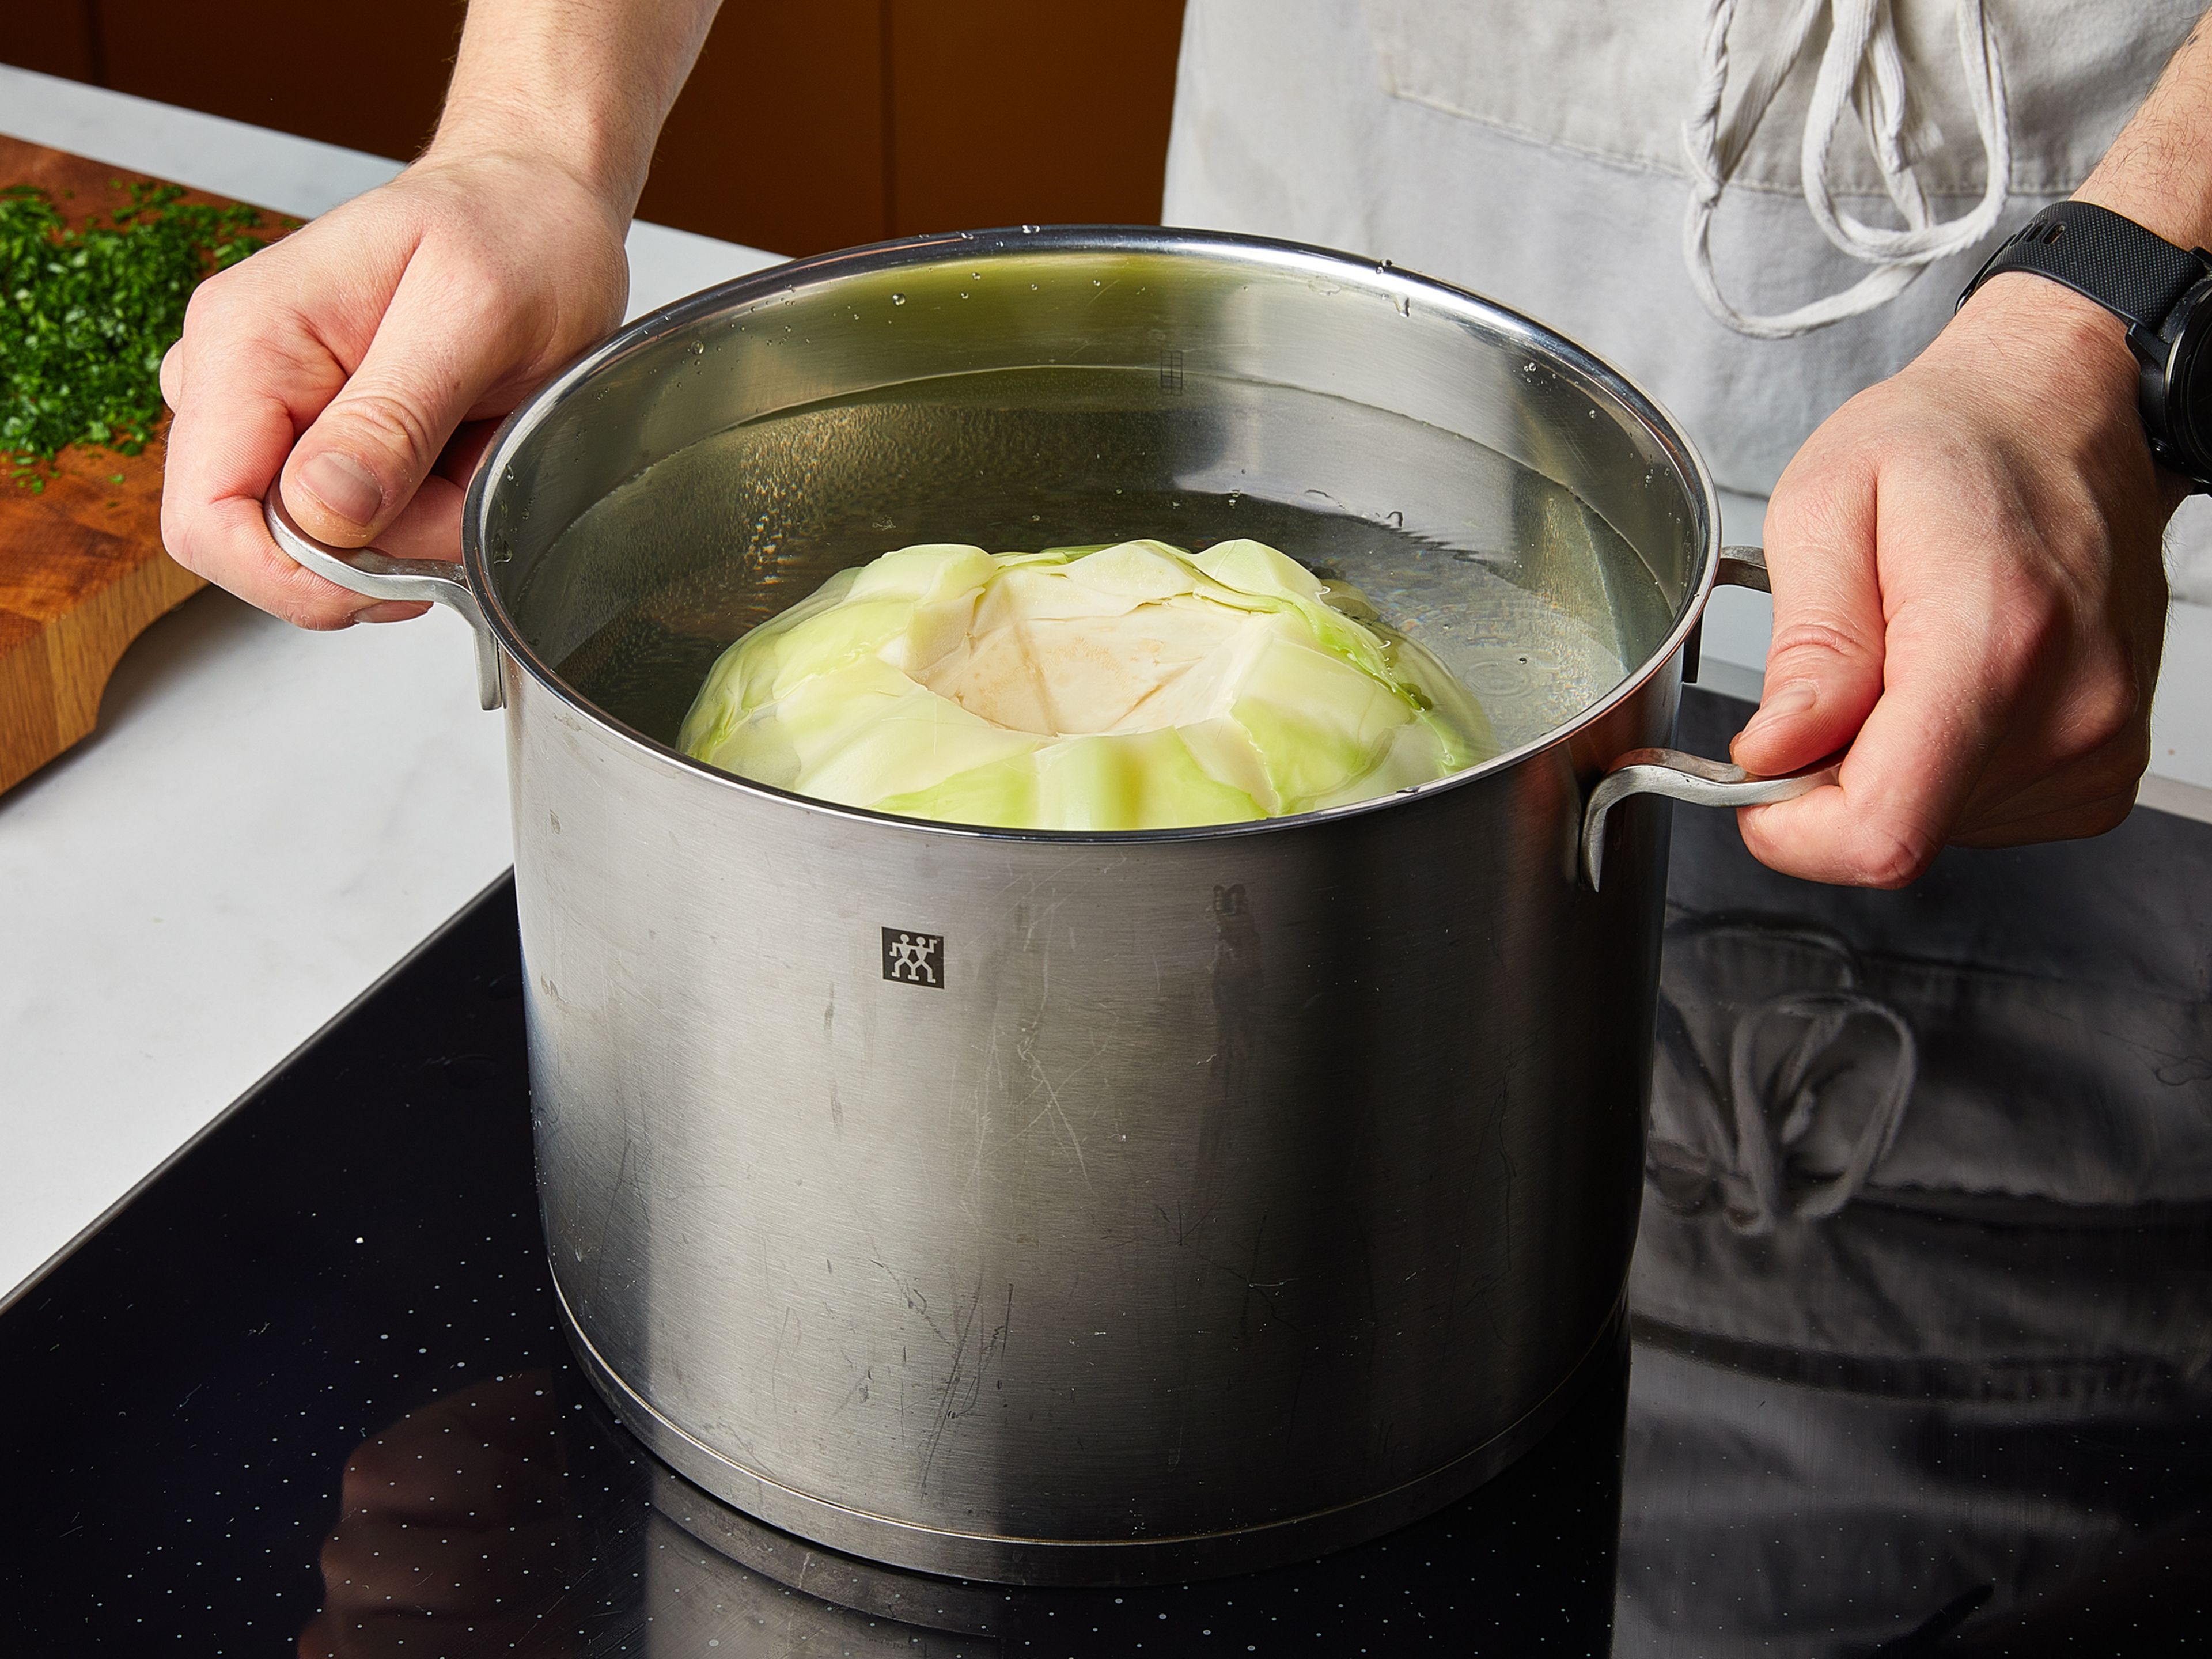 In a large pot, bring water and salt to a boil. Remove stalk from cabbage. Blanch cabbage head for approx. 10 min. until outer leaves are soft and peel off easily. Remove from water, let cool briefly, and peel off enough cabbage leaves for the amount of rolls. Finely chop parsley. Cut bread rolls into cubes. Coarsely chop mushrooms. Peel and finely dice onions. Peel and mince garlic. Remove water from the pot and wipe dry. Return the pot to medium heat and heat a little vegetable oil. Add mushrooms, half of the onion cubes and sauté for approx. 3–4 min. until translucent. Deglaze with plant-based milk and season generously with nutmeg, mustard, salt and pepper.